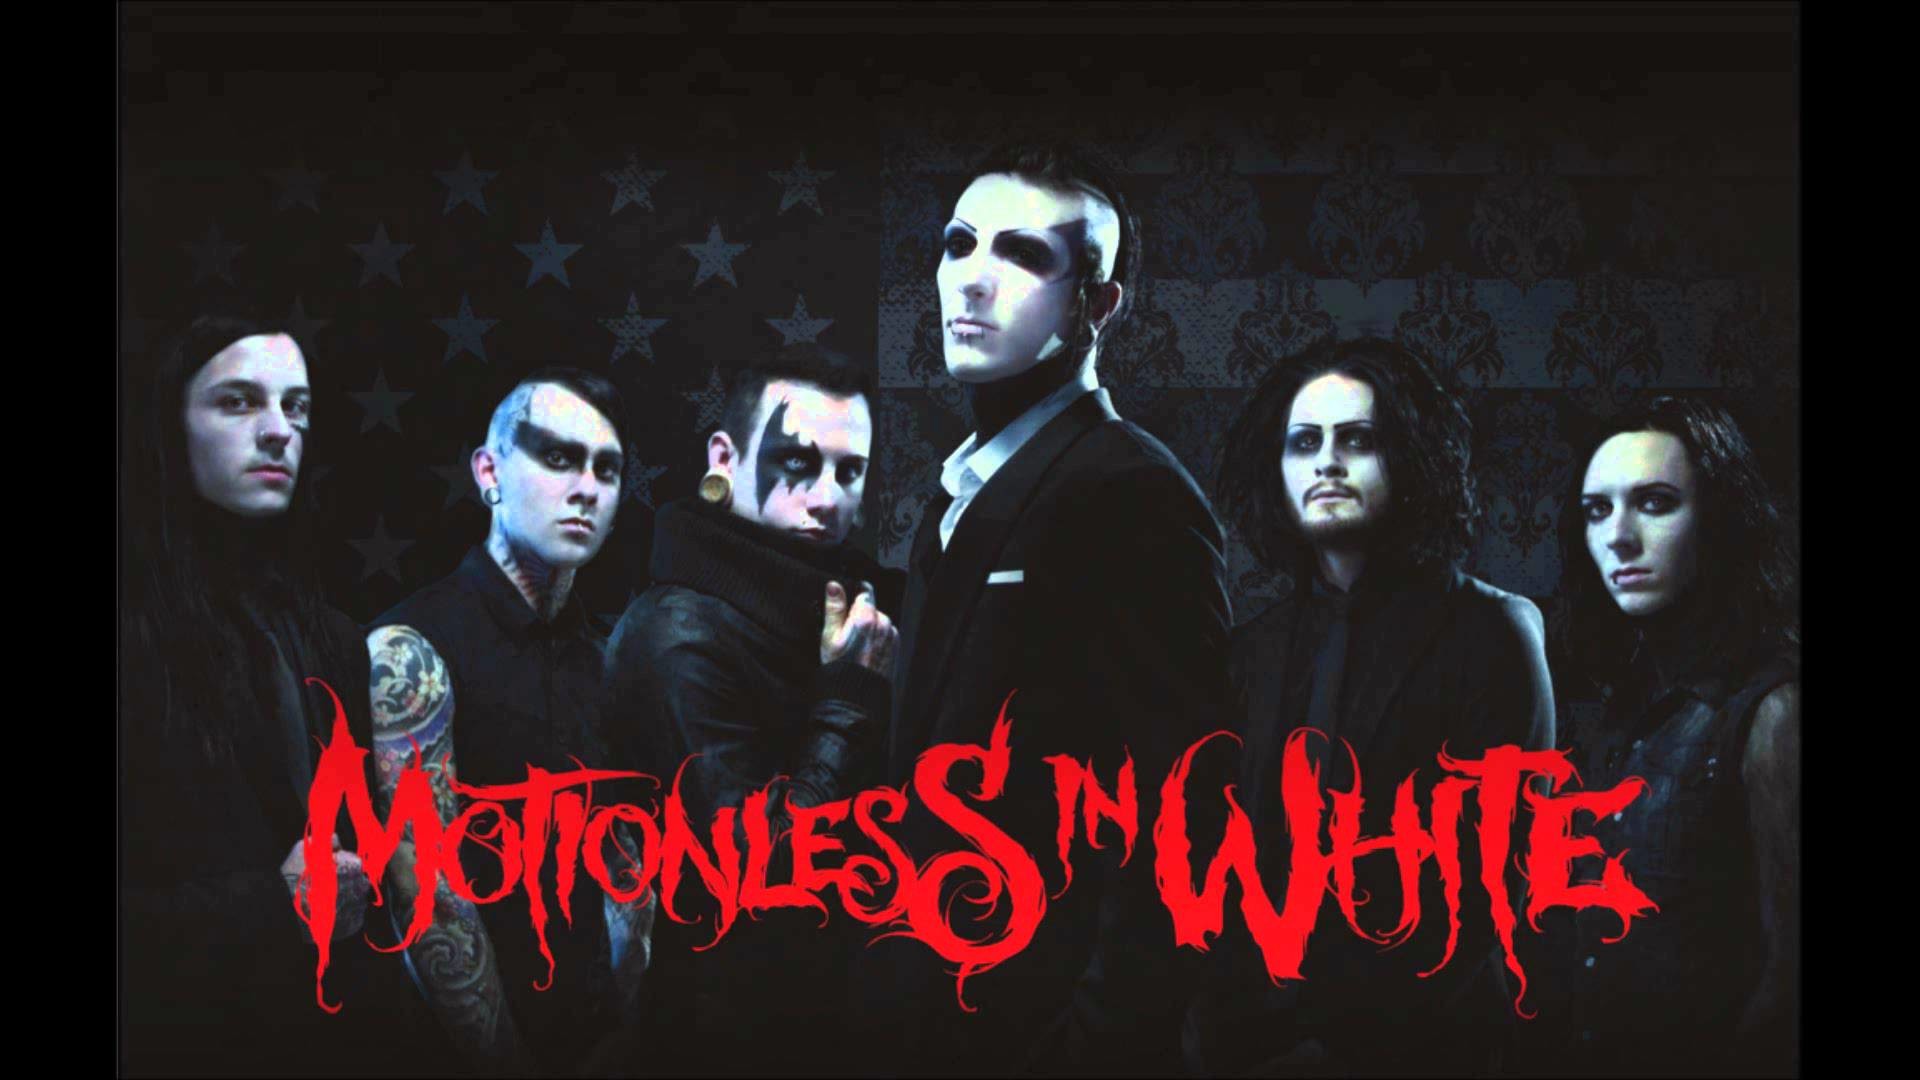 1920x1080 Motionless In White - "Puppets 2 (The Rain)" (DELUXE EDITION)